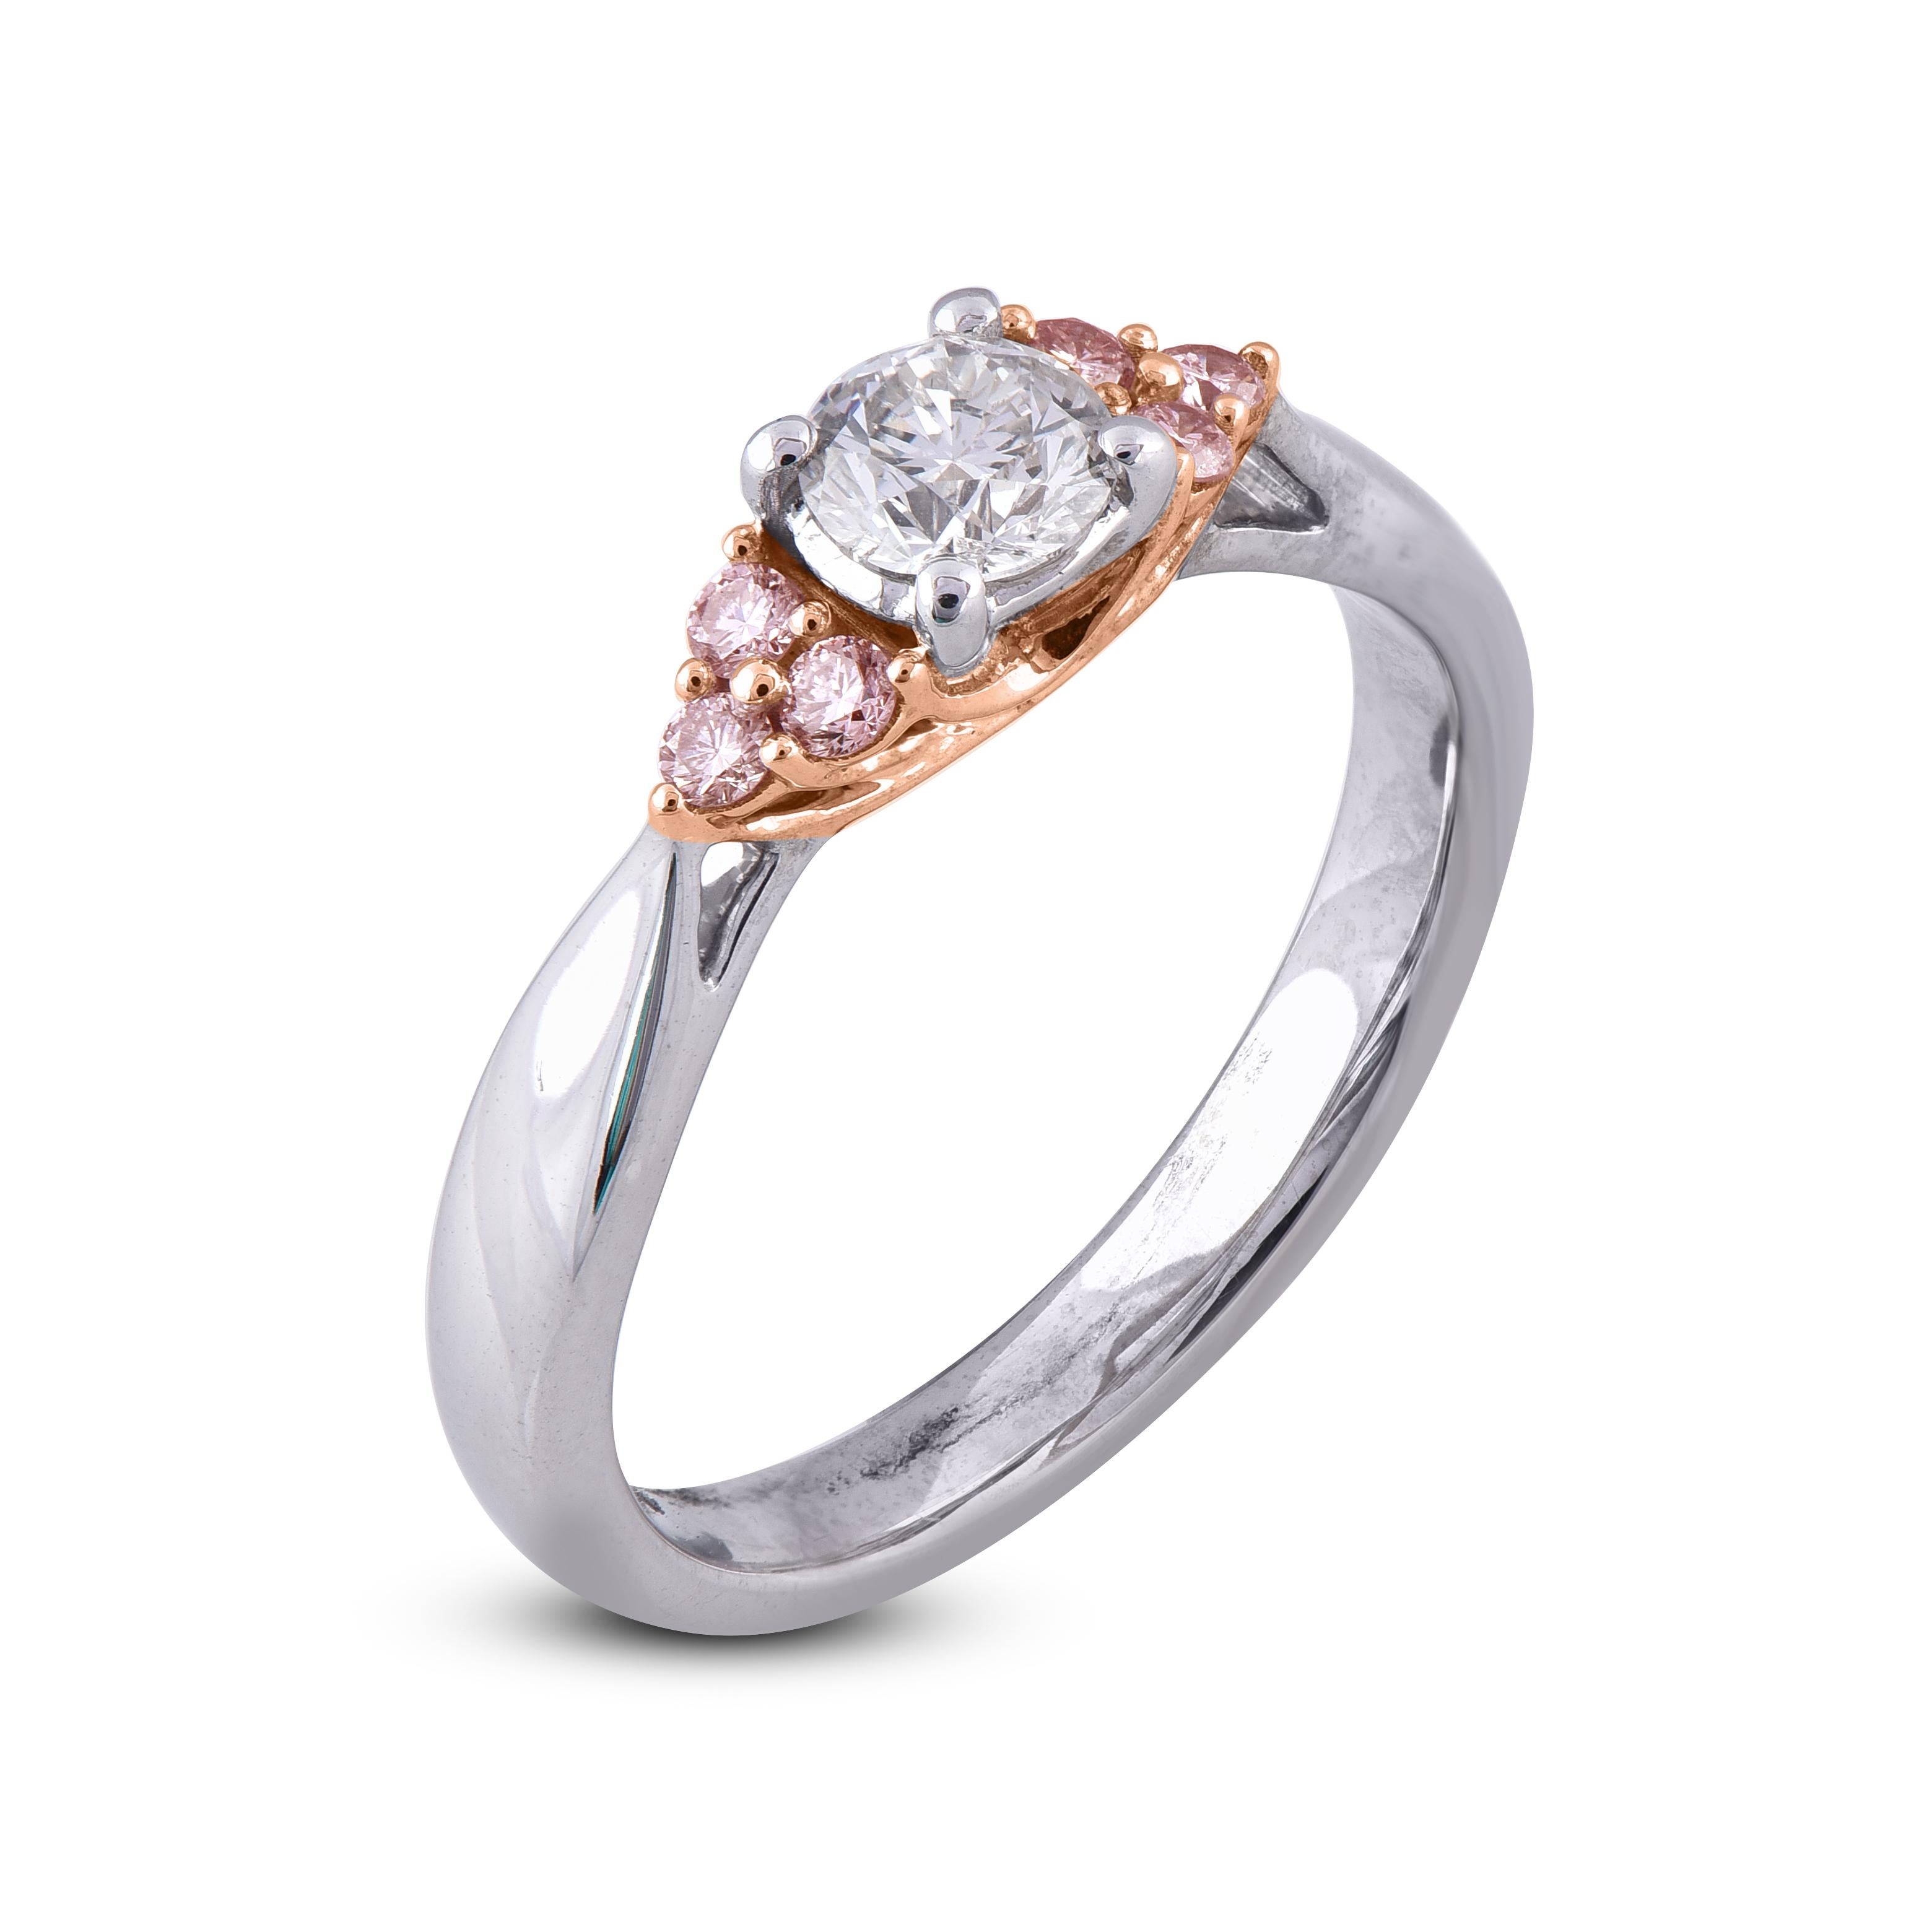 You'll adore the petite touch of shimmer these diamond engagement ring add to your attire. Captivating with 0.45 ct of centre stone and 0.15 ct natural pink diamond. Beautifully hand-crafted by our inhouse experts in 18 karat two toned gold and